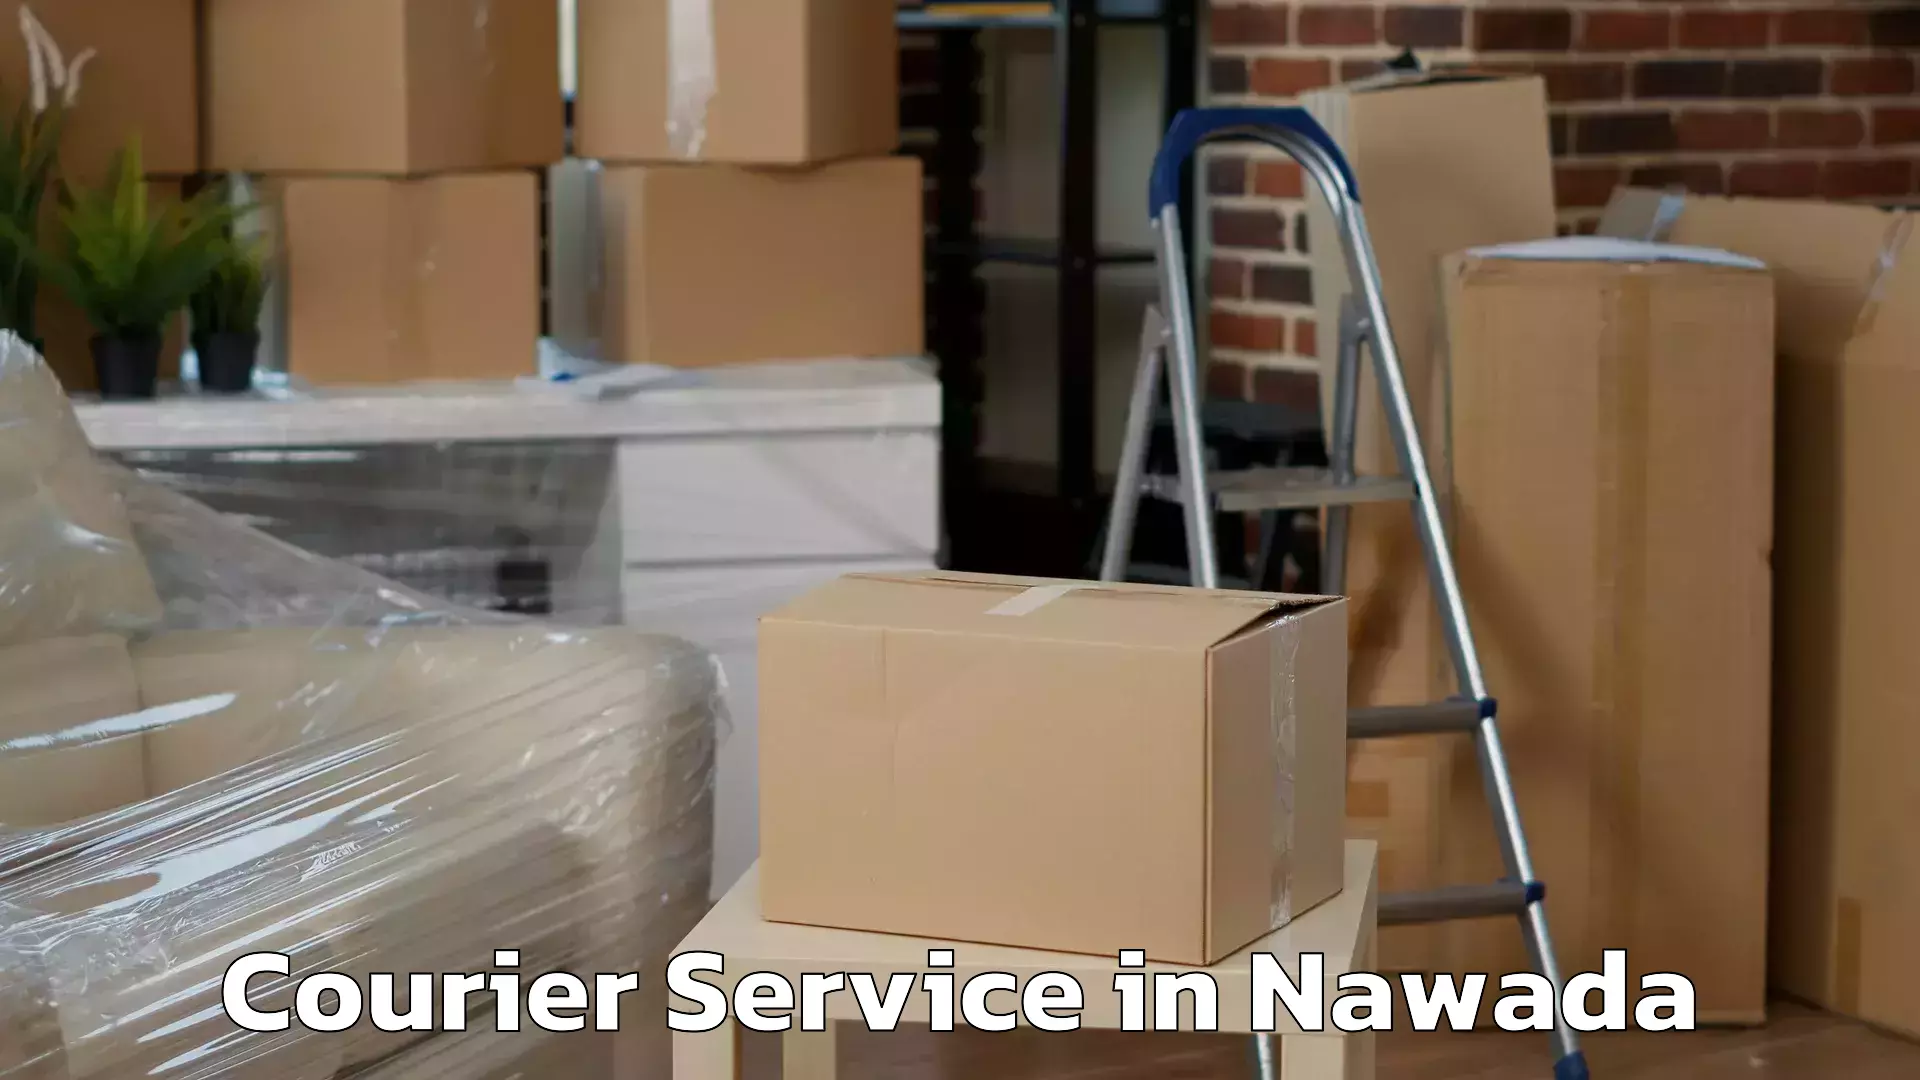 Express courier facilities in Nawada